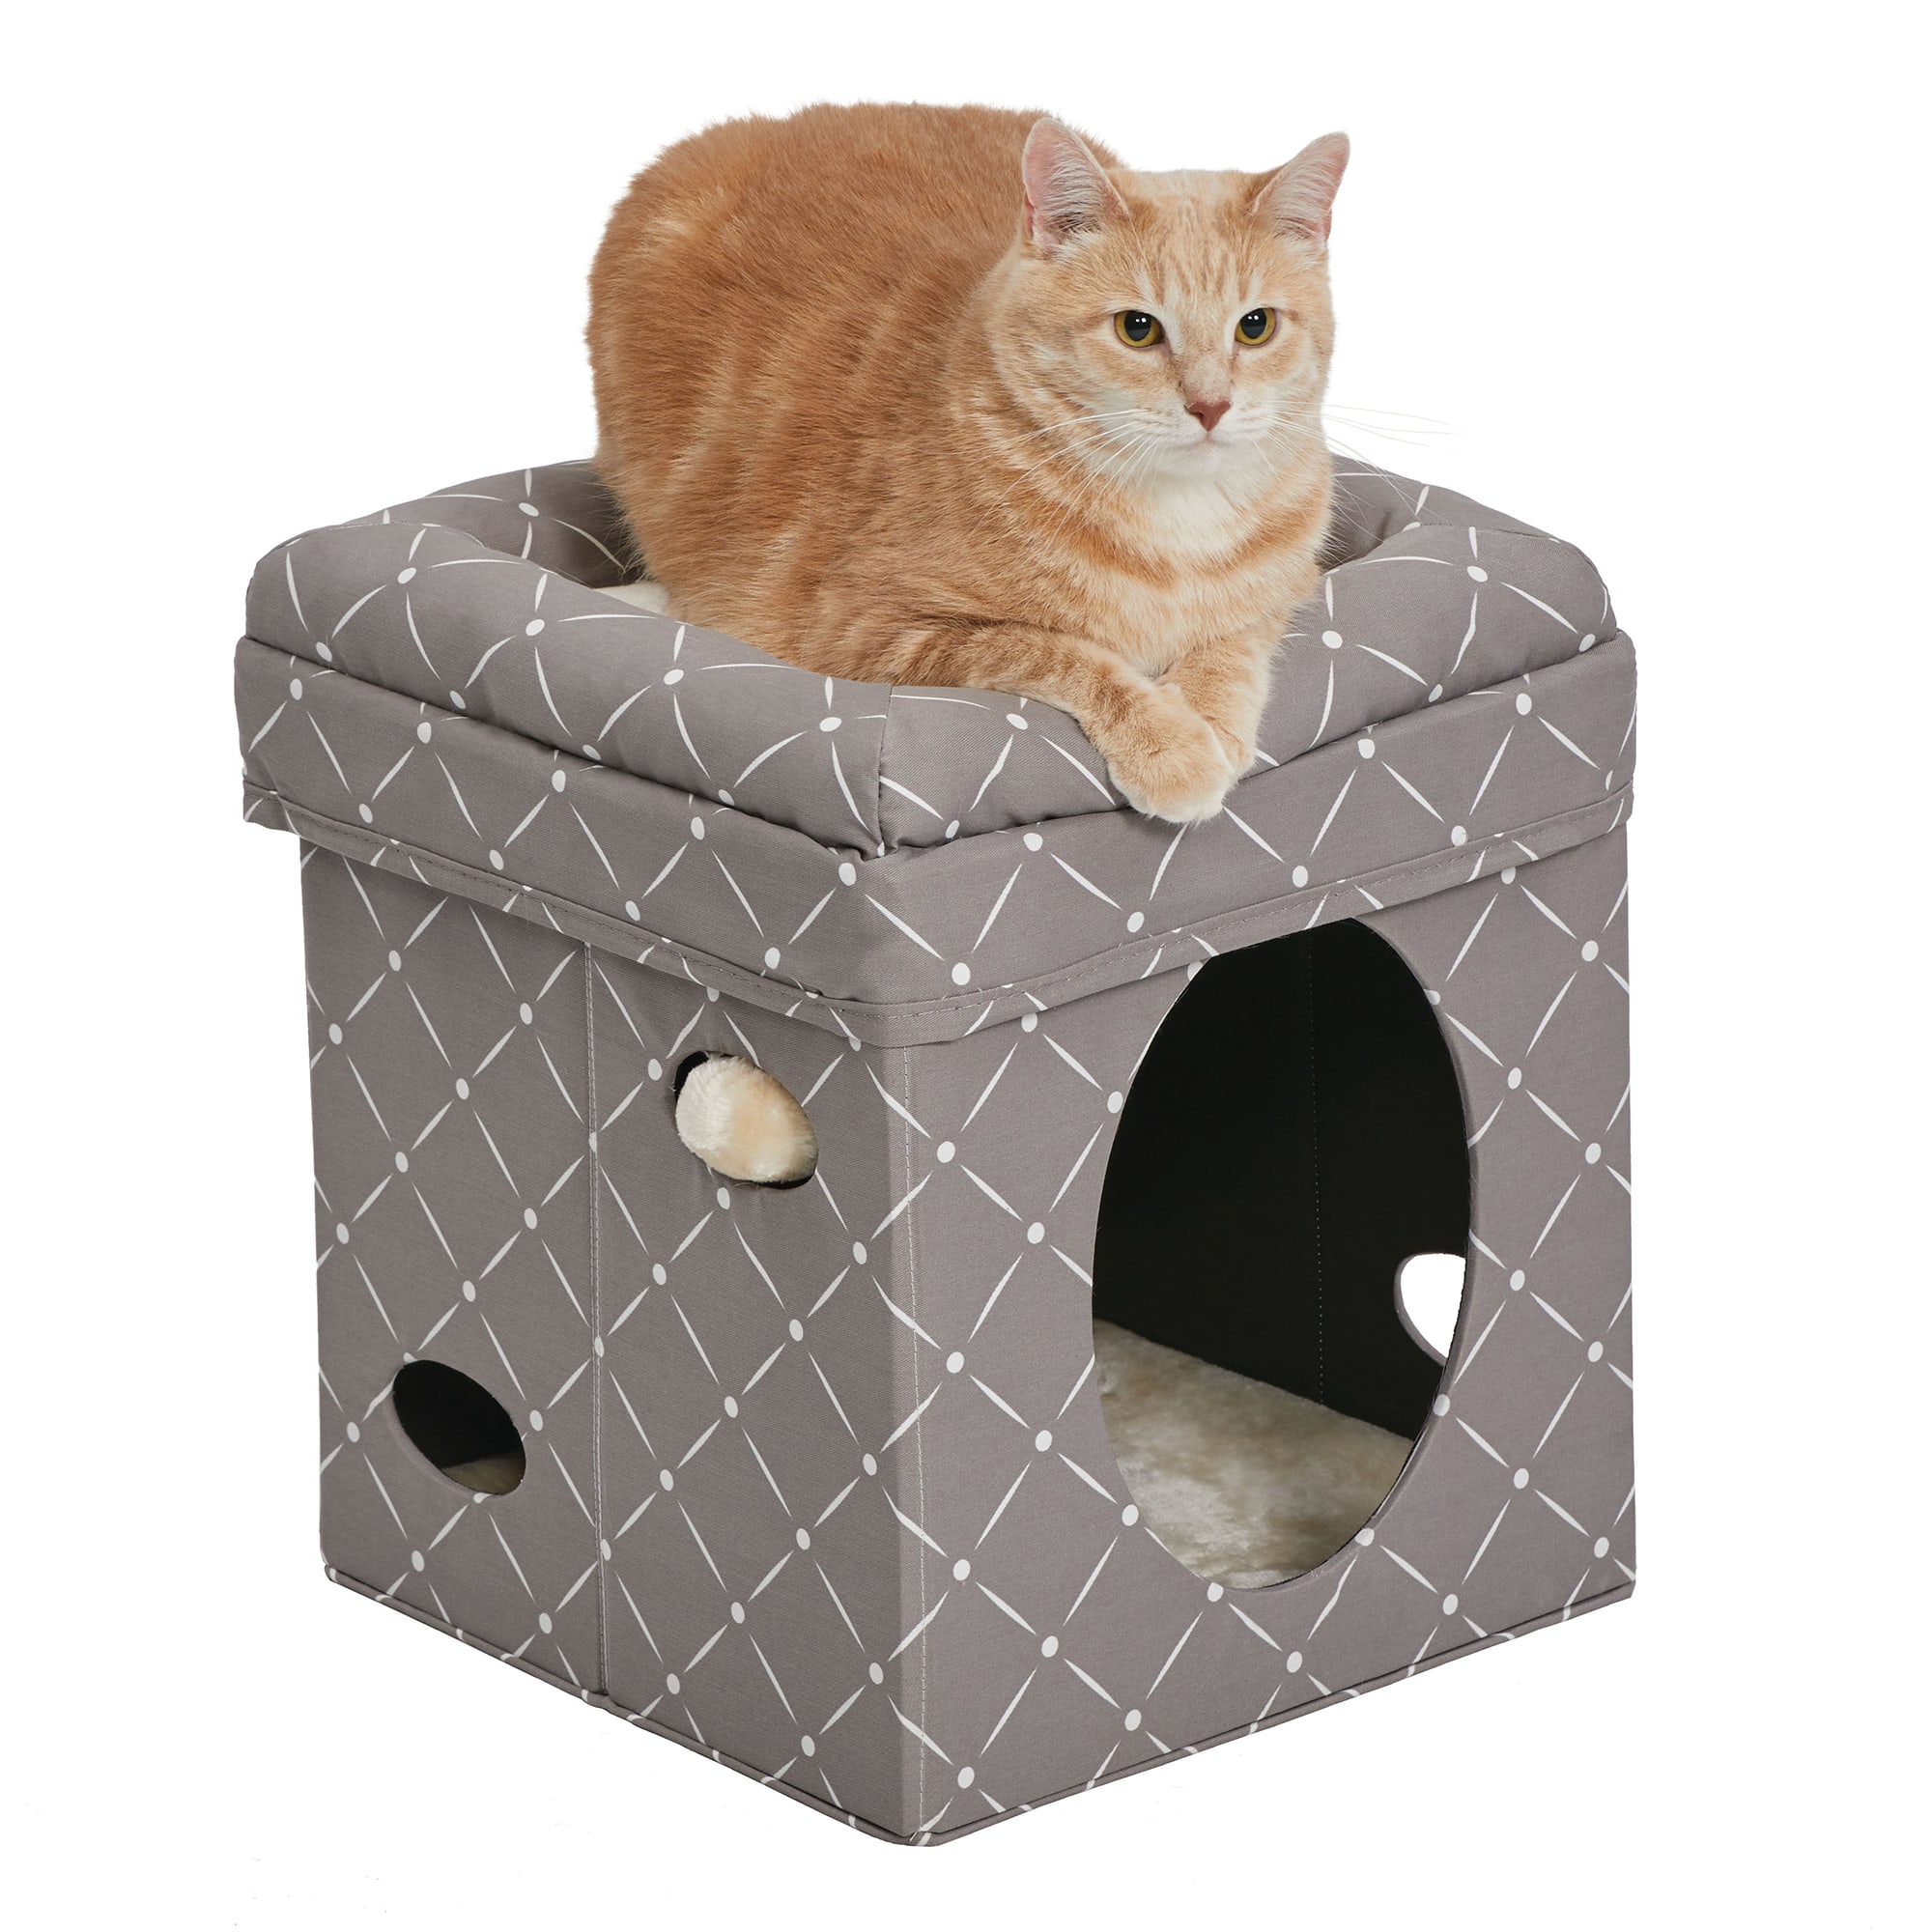 Photos - Cat Bed / House Midwest Curious Mushroom Cat Cube, 16.5" H, Gray 137-MRD 